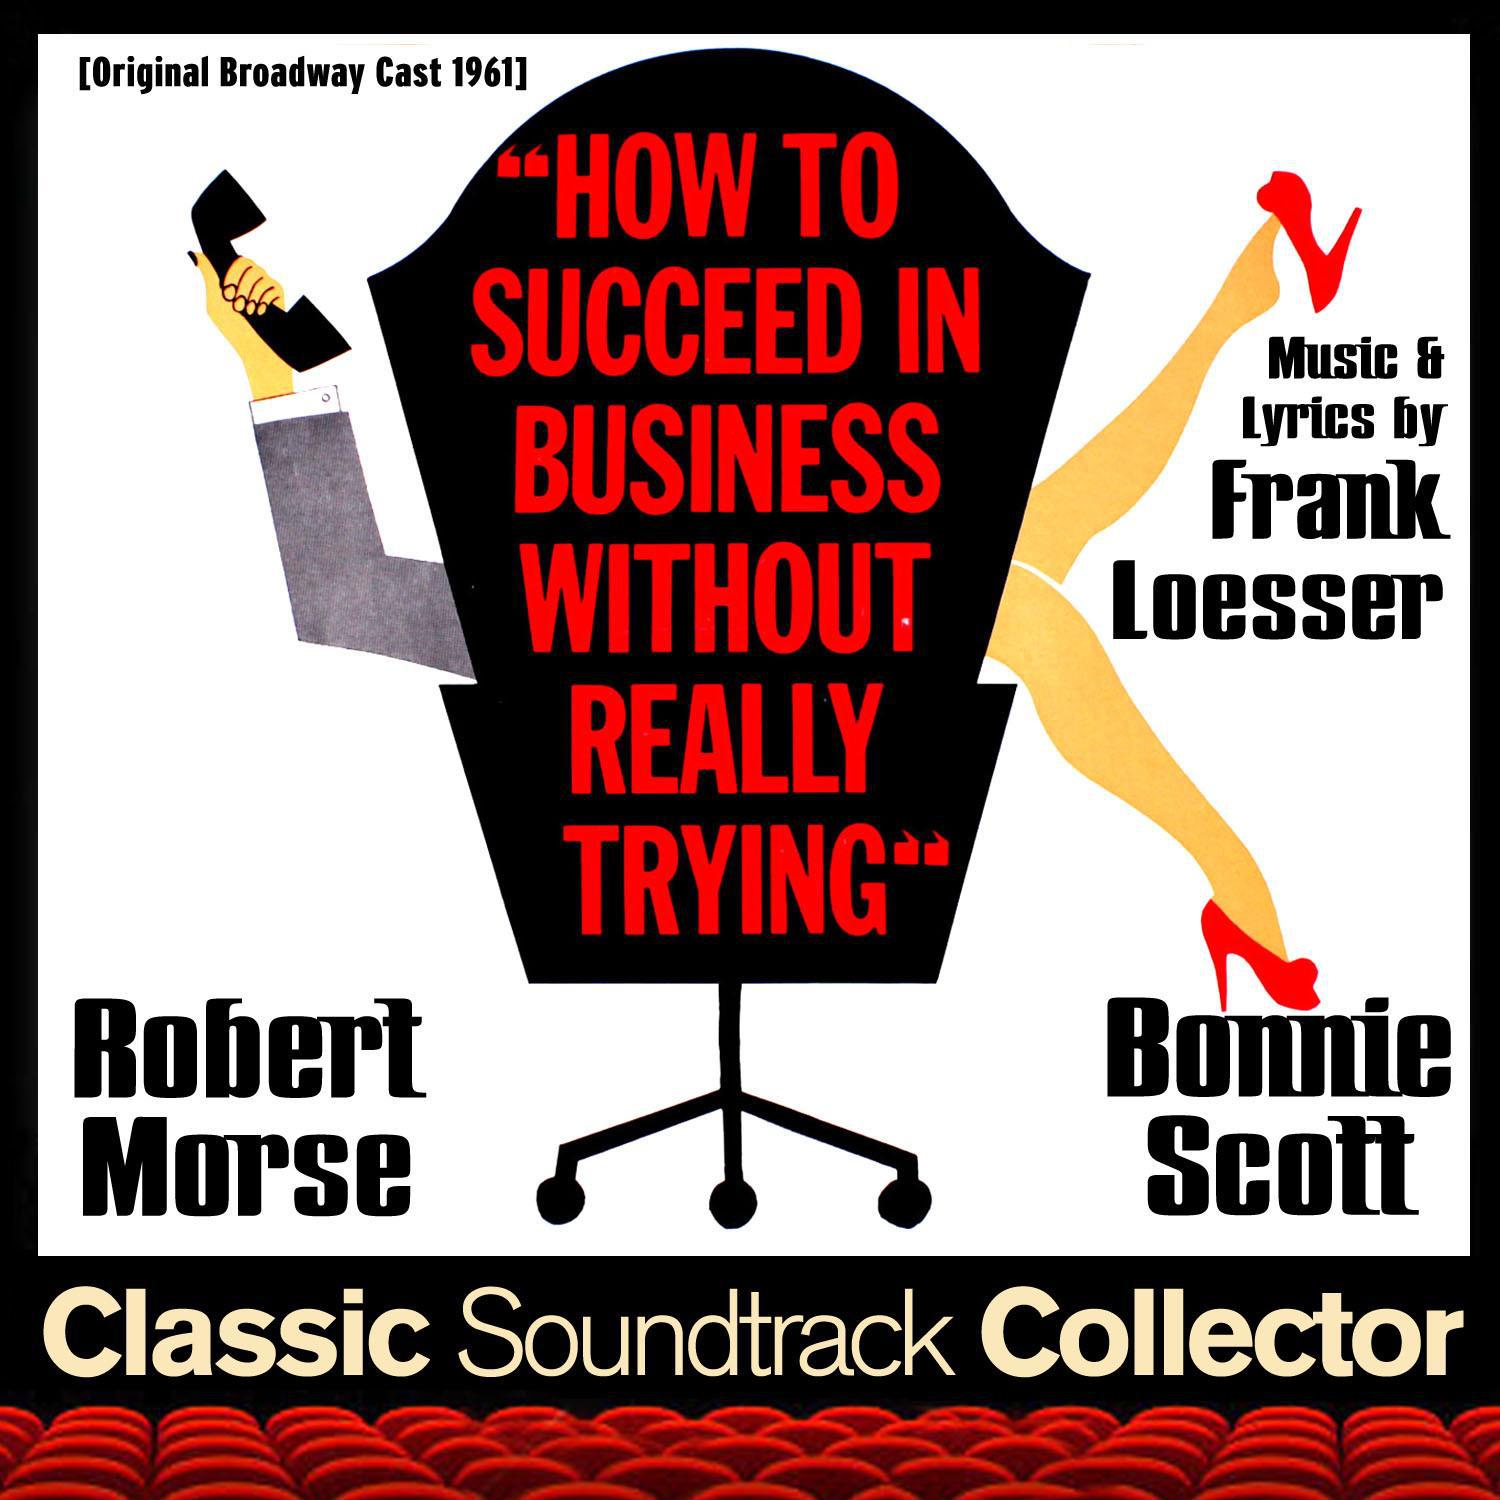 How to Succeed in Business Without Really Trying (Original Broadway Cast 1961)